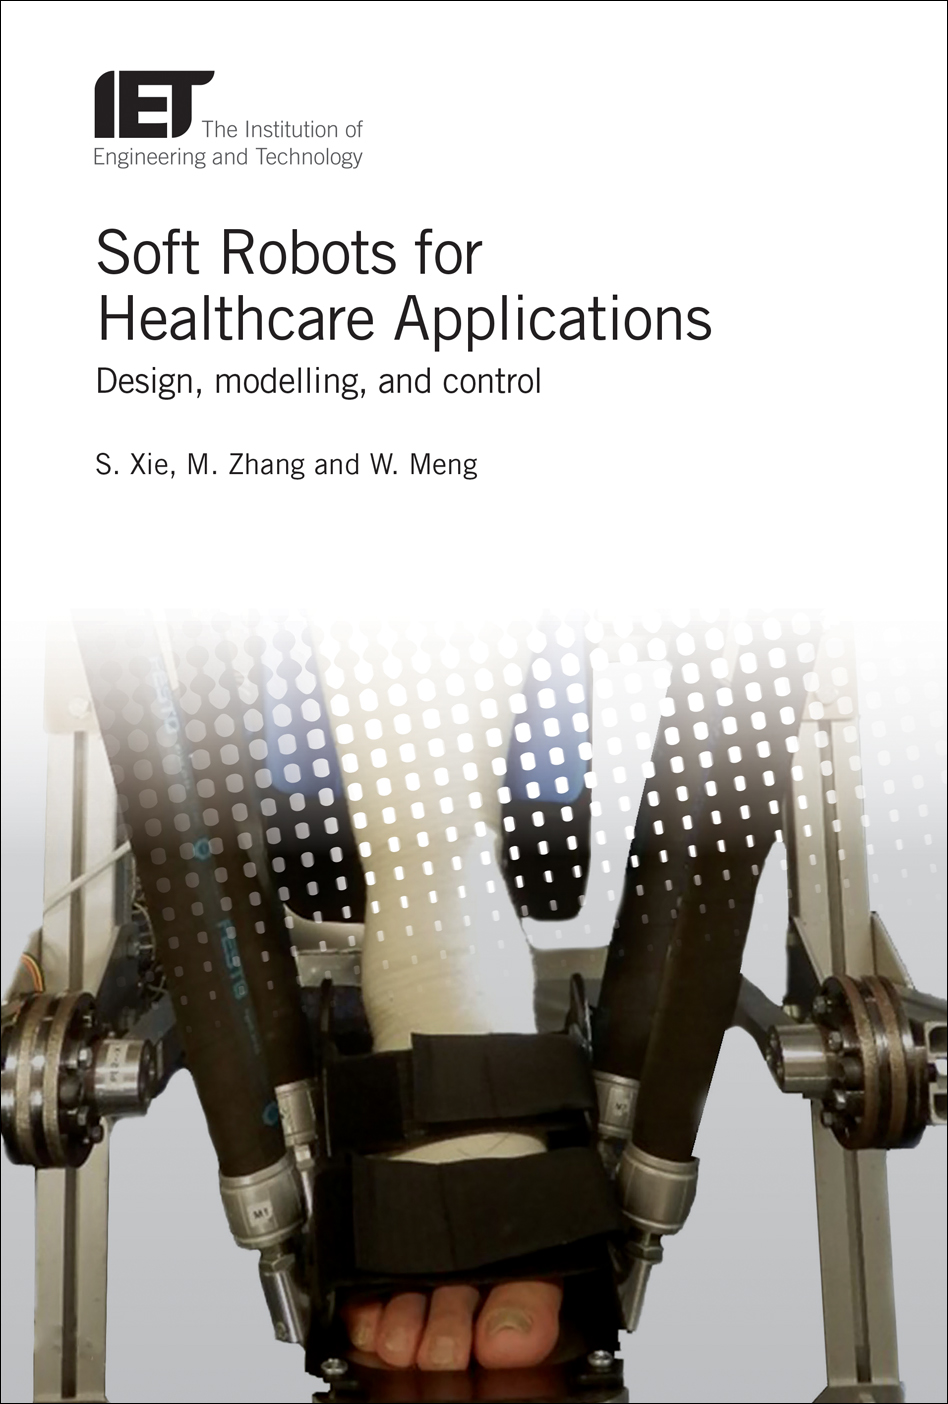 Soft Robots for Healthcare Applications, Design, modelling, and control